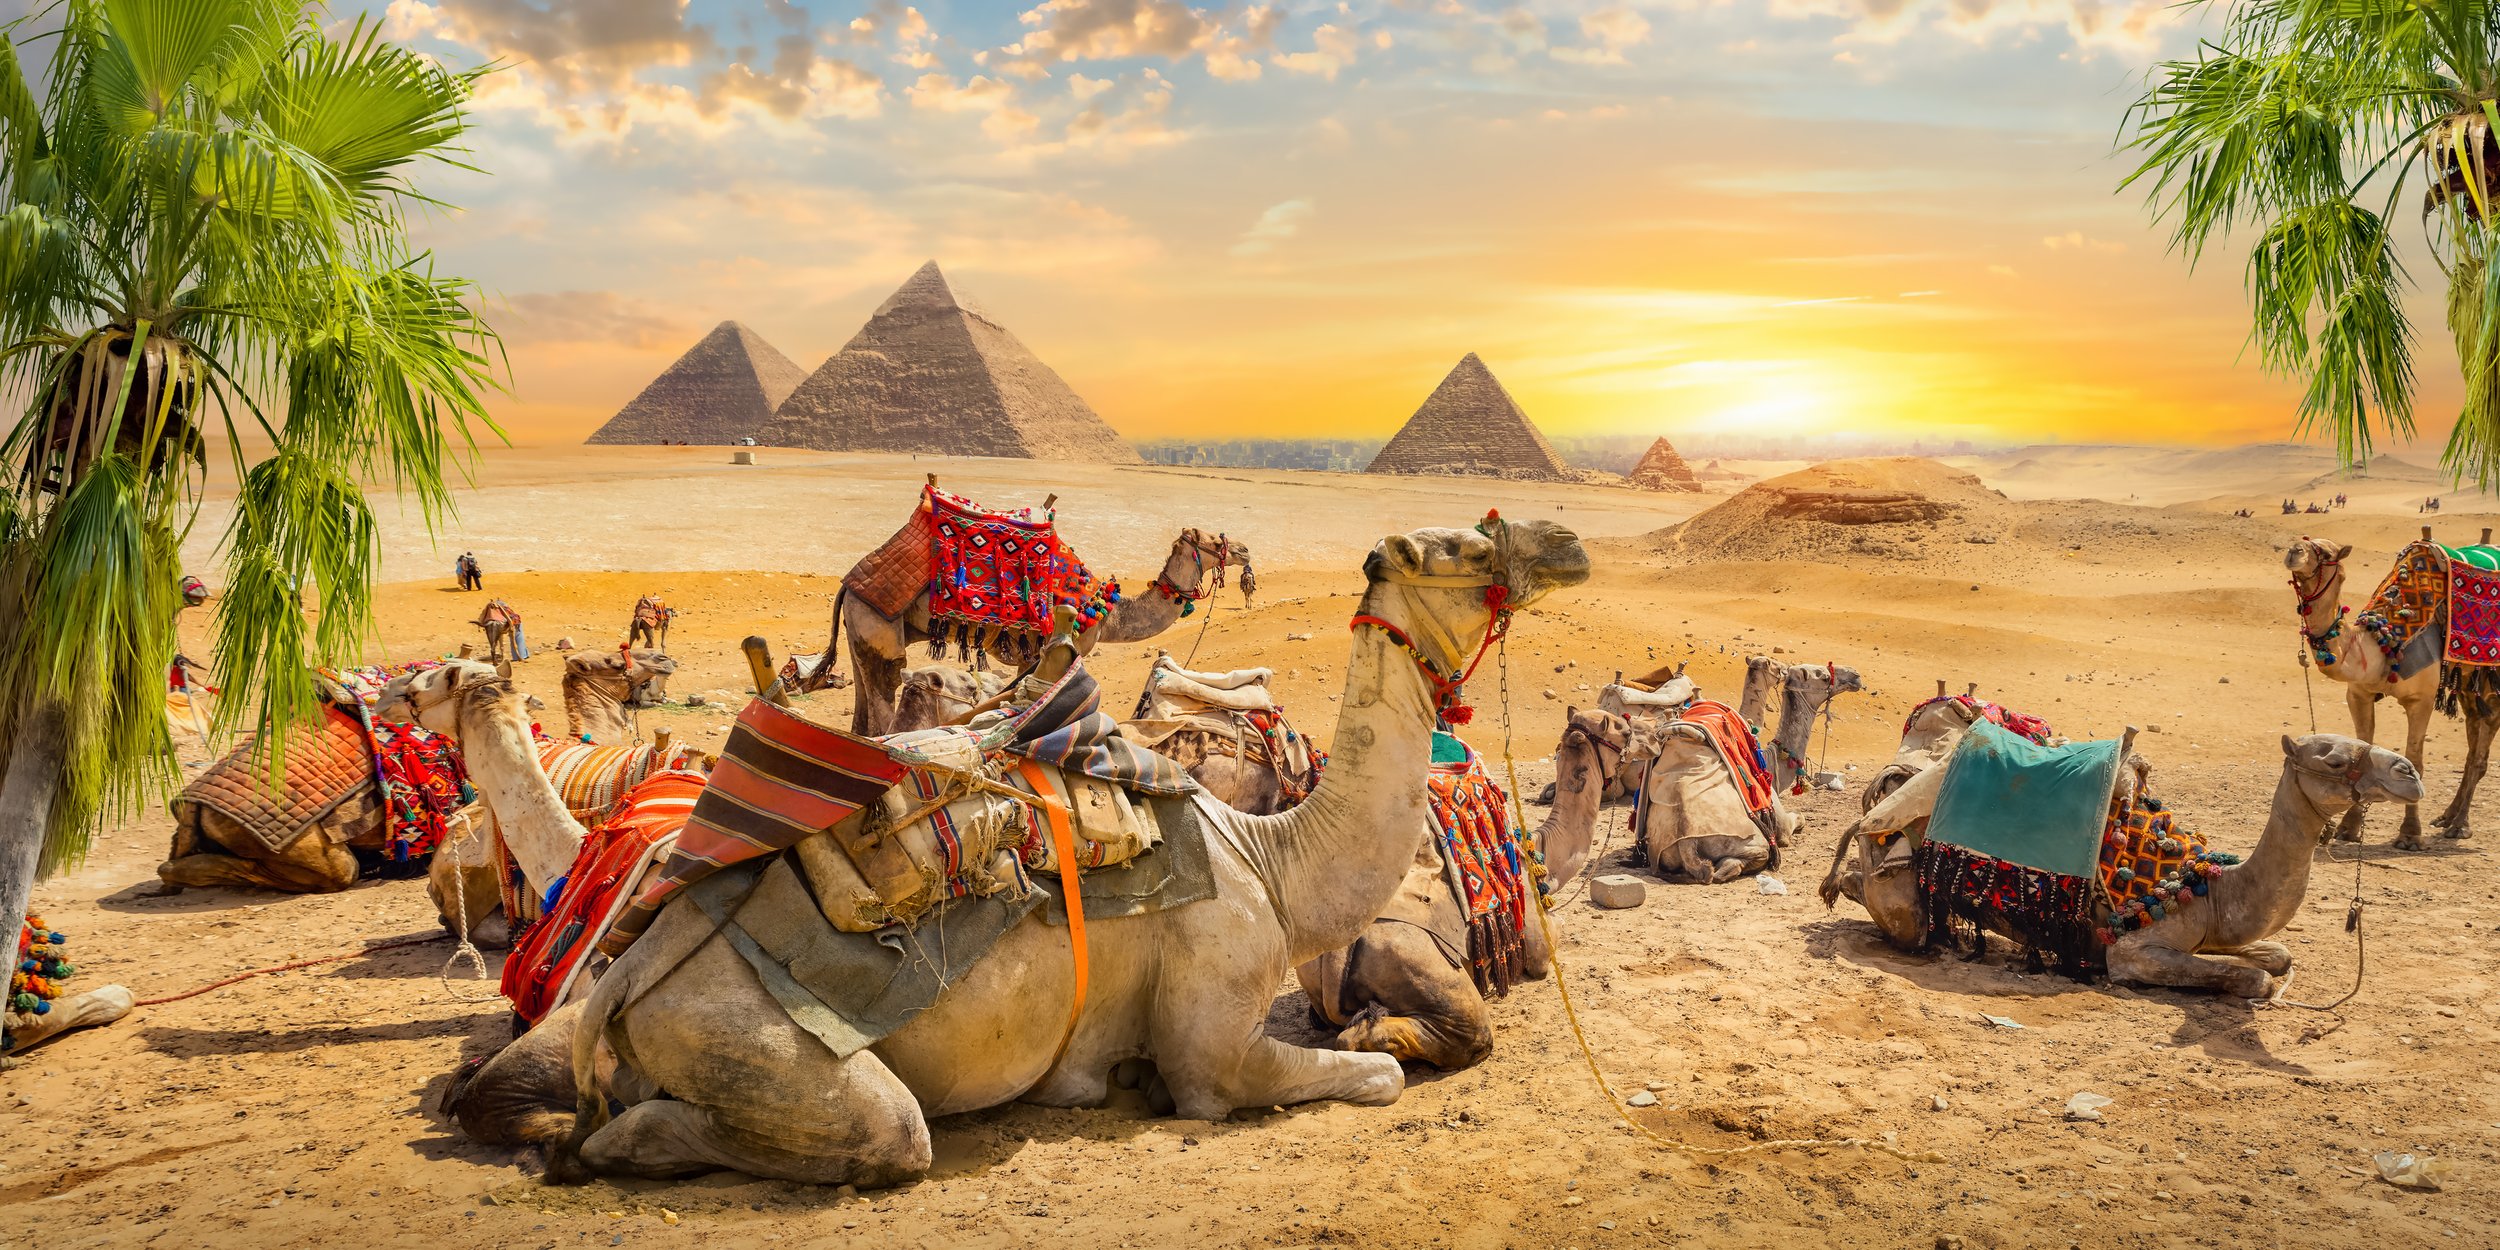 Everything about Camels5.jpg